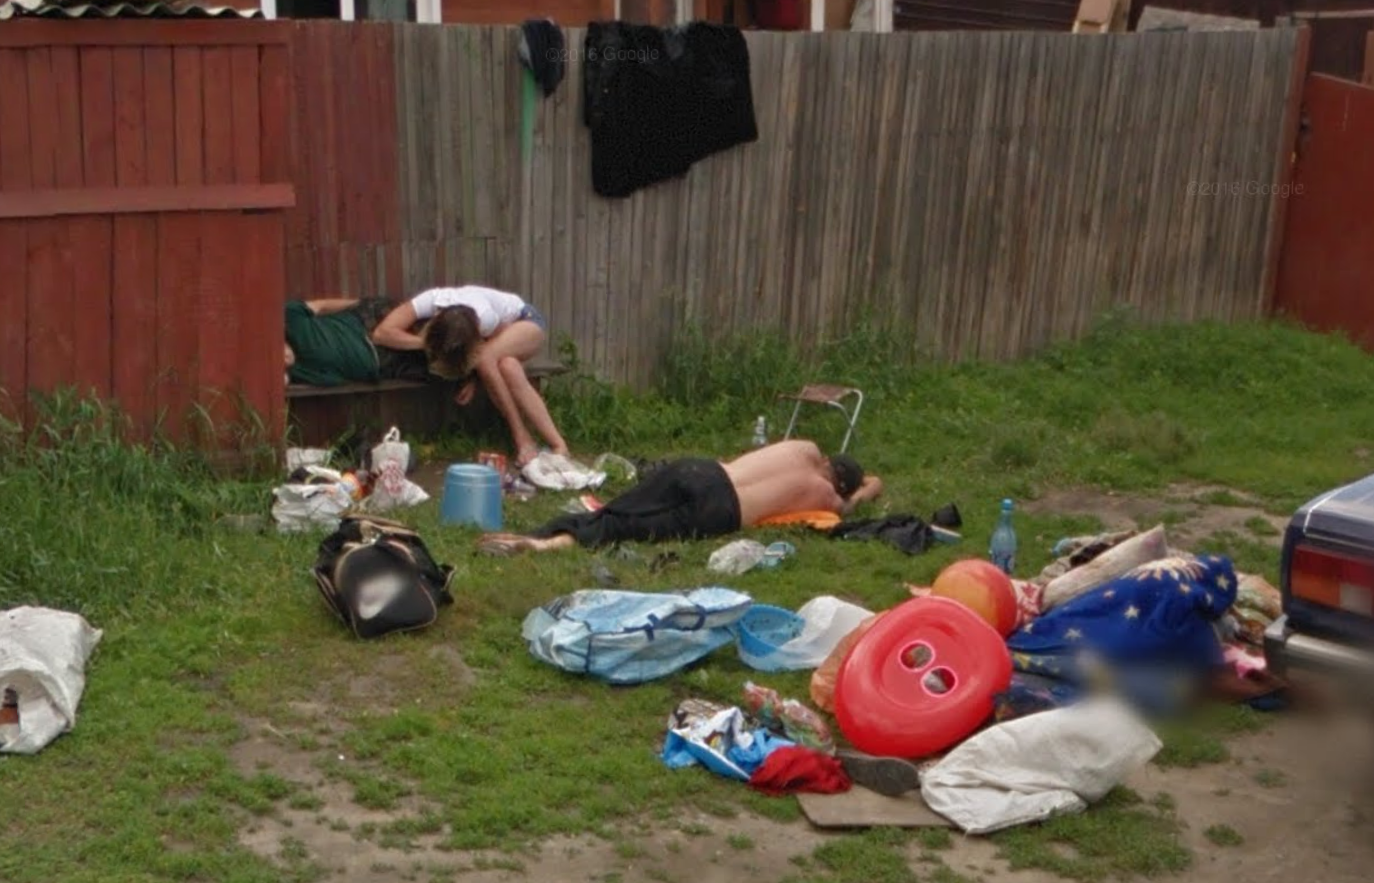 In an image recorded back in 2013, Google photographed a family of three in Russian city of Novoaltaysk, collapsed outside in a heap of garbage and lawn furniture. In the picture, bottles and grocery bags are strewn about the yard, and two of the people are piled on top of each other. (Image: Google via The Moscow Times)